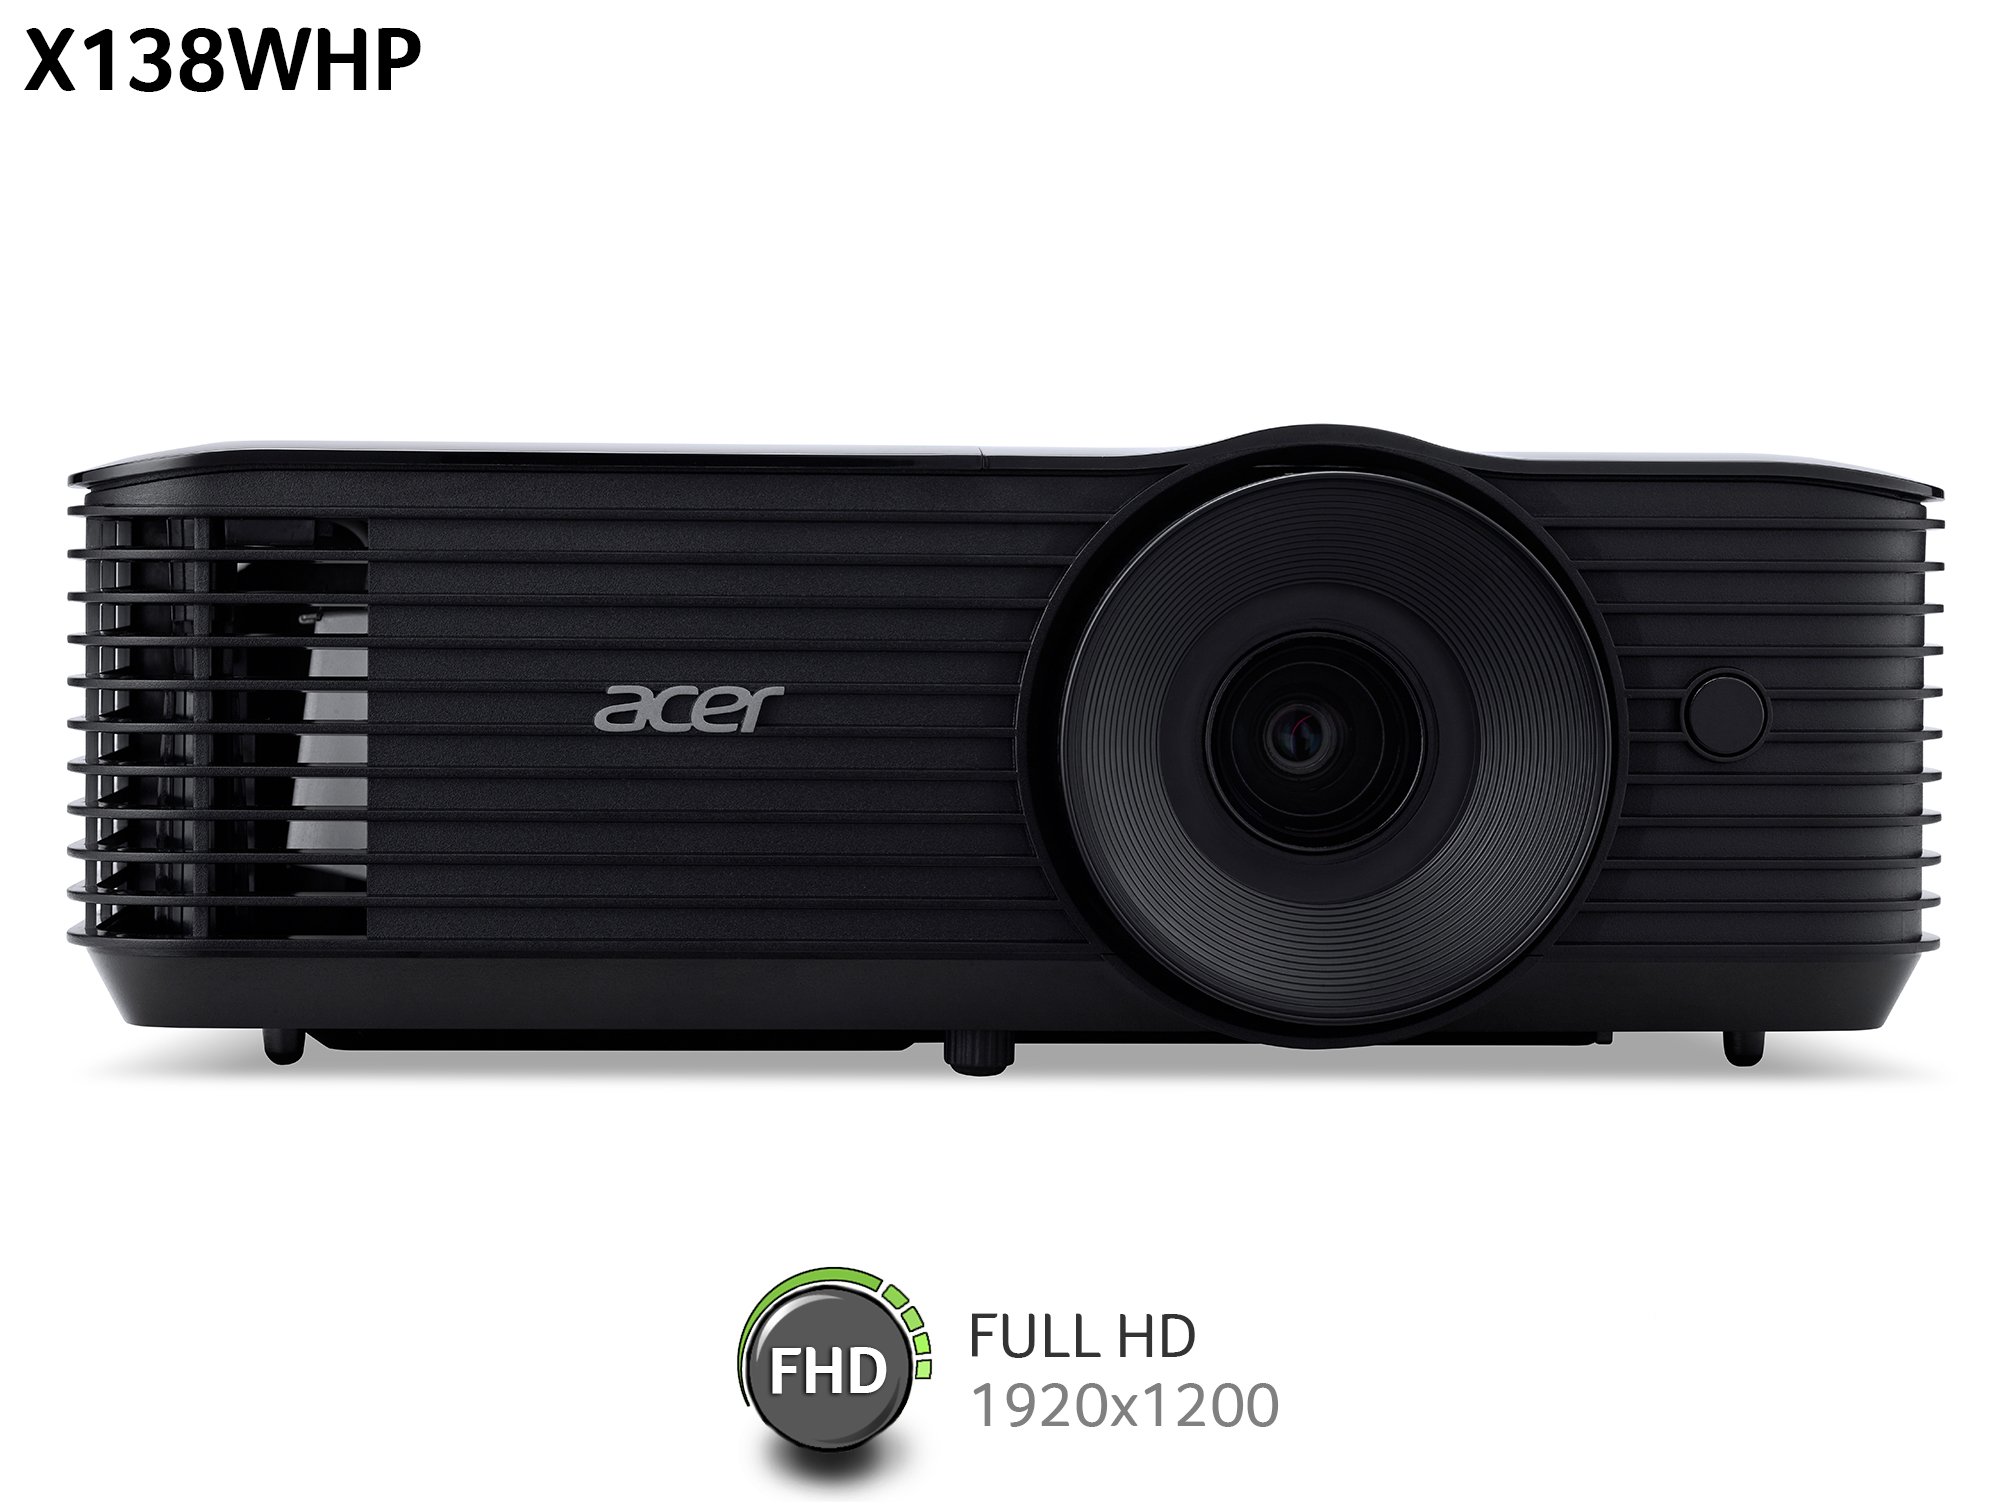 Acer X138WHP 3D WXGA Home Projector Review